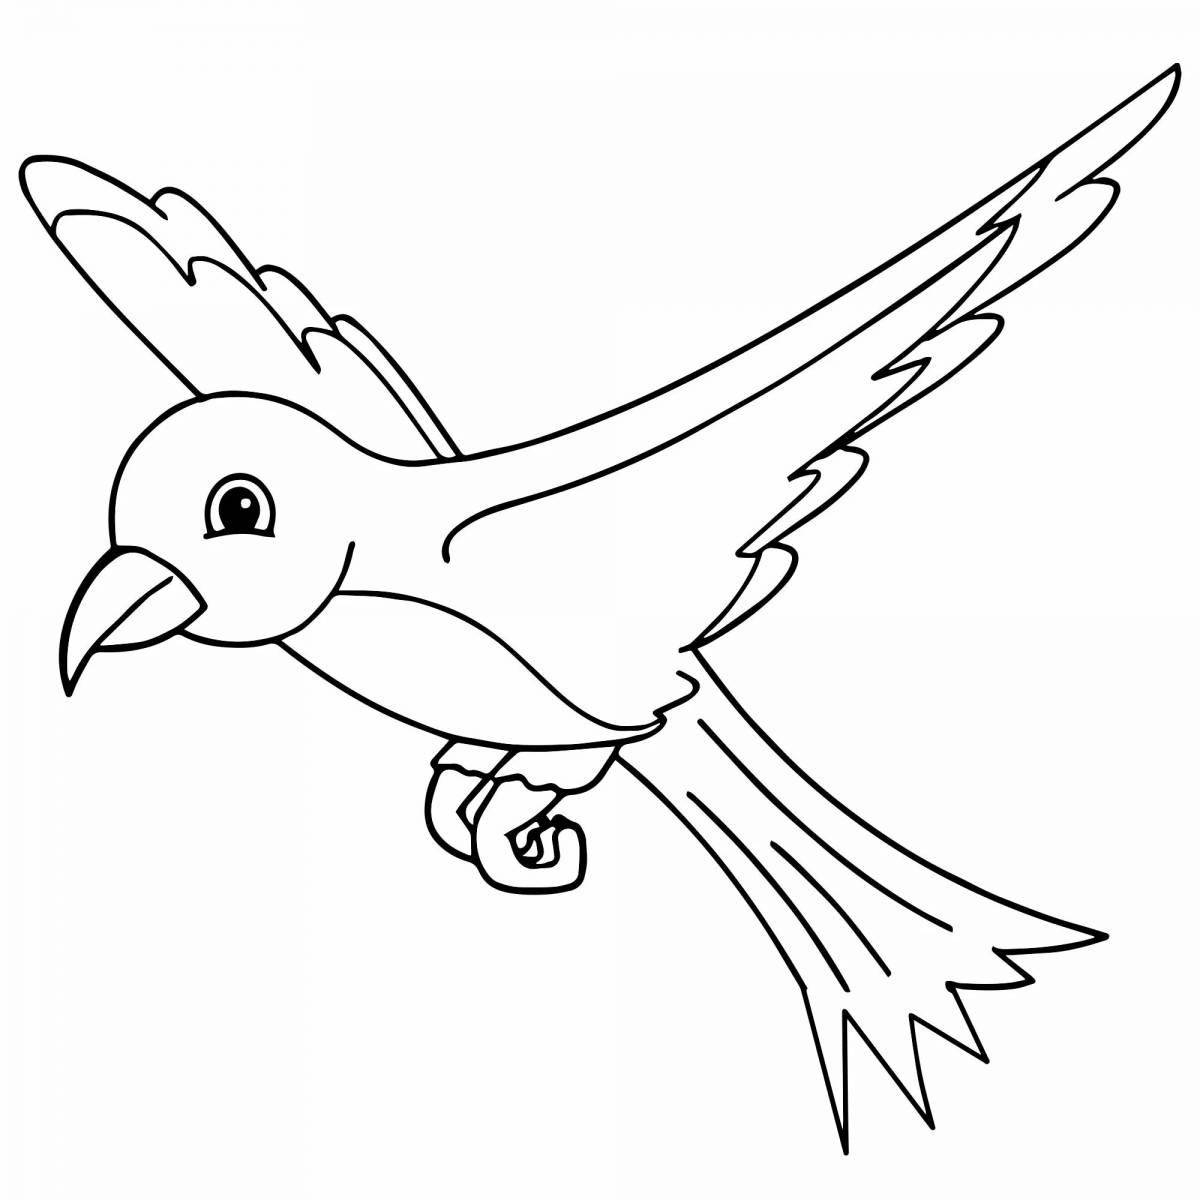 Funny children's coloring book with birds